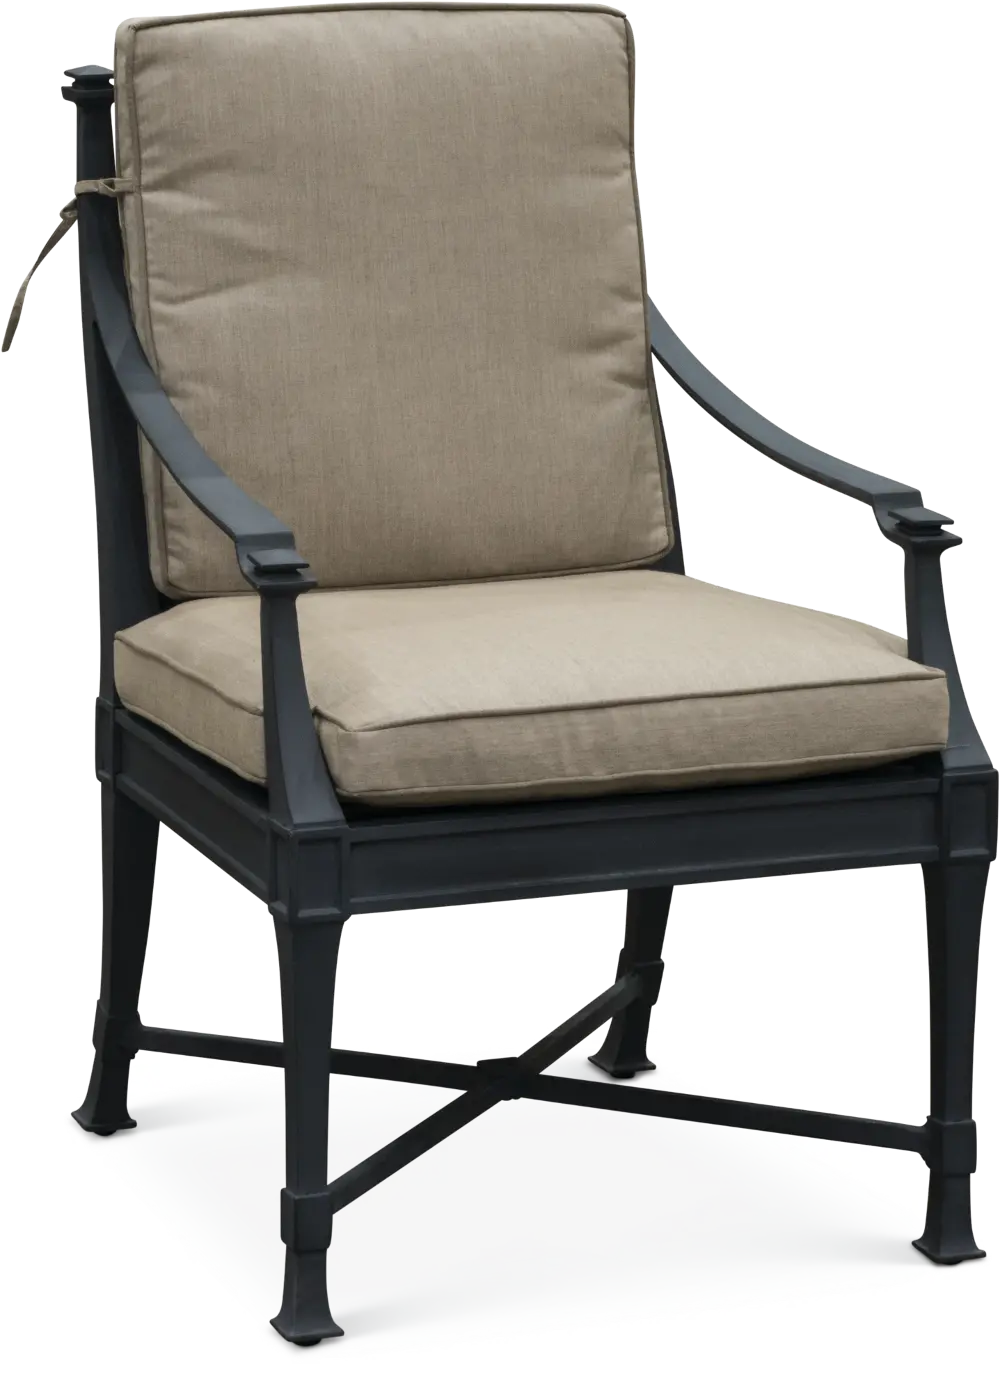 Blue Gray and Tan Outdoor Patio Arm Chair - Antioch-1